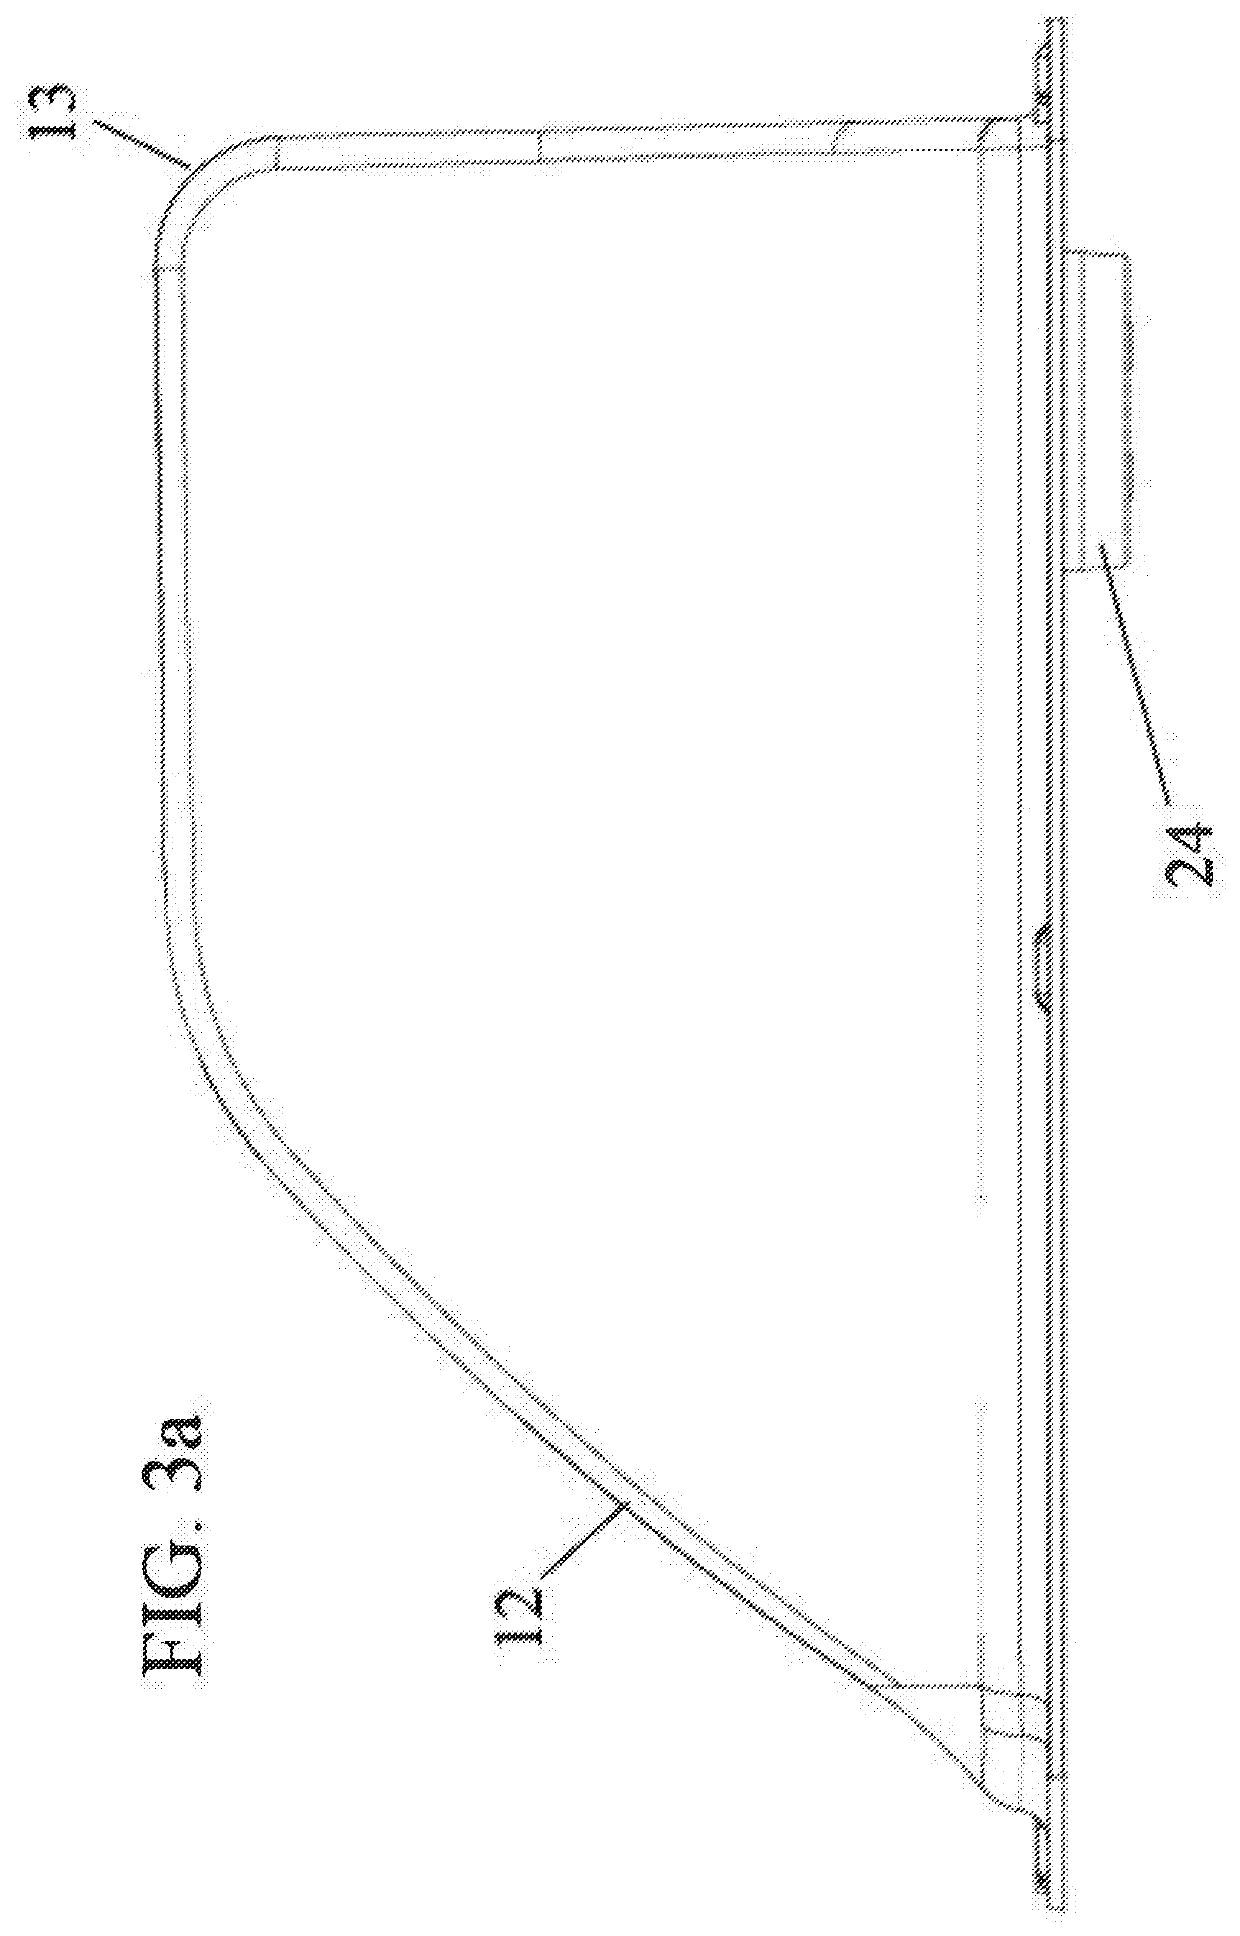 Roof mounted antenna for recreational vehicles and the like